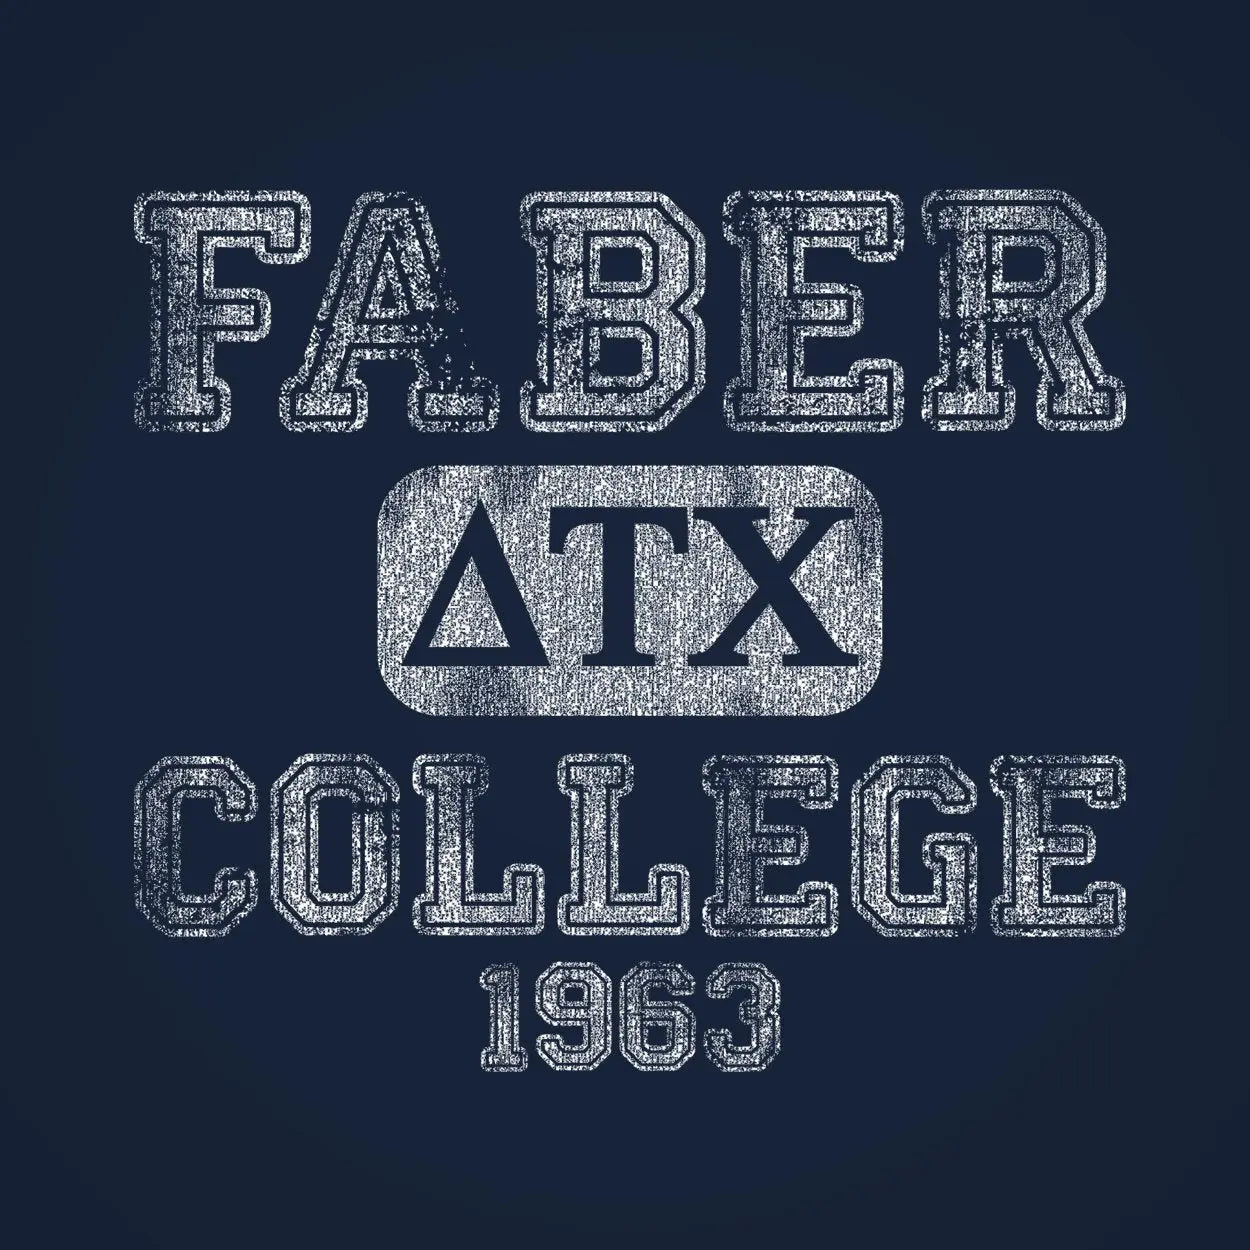 Faber College Tshirt - Donkey Tees